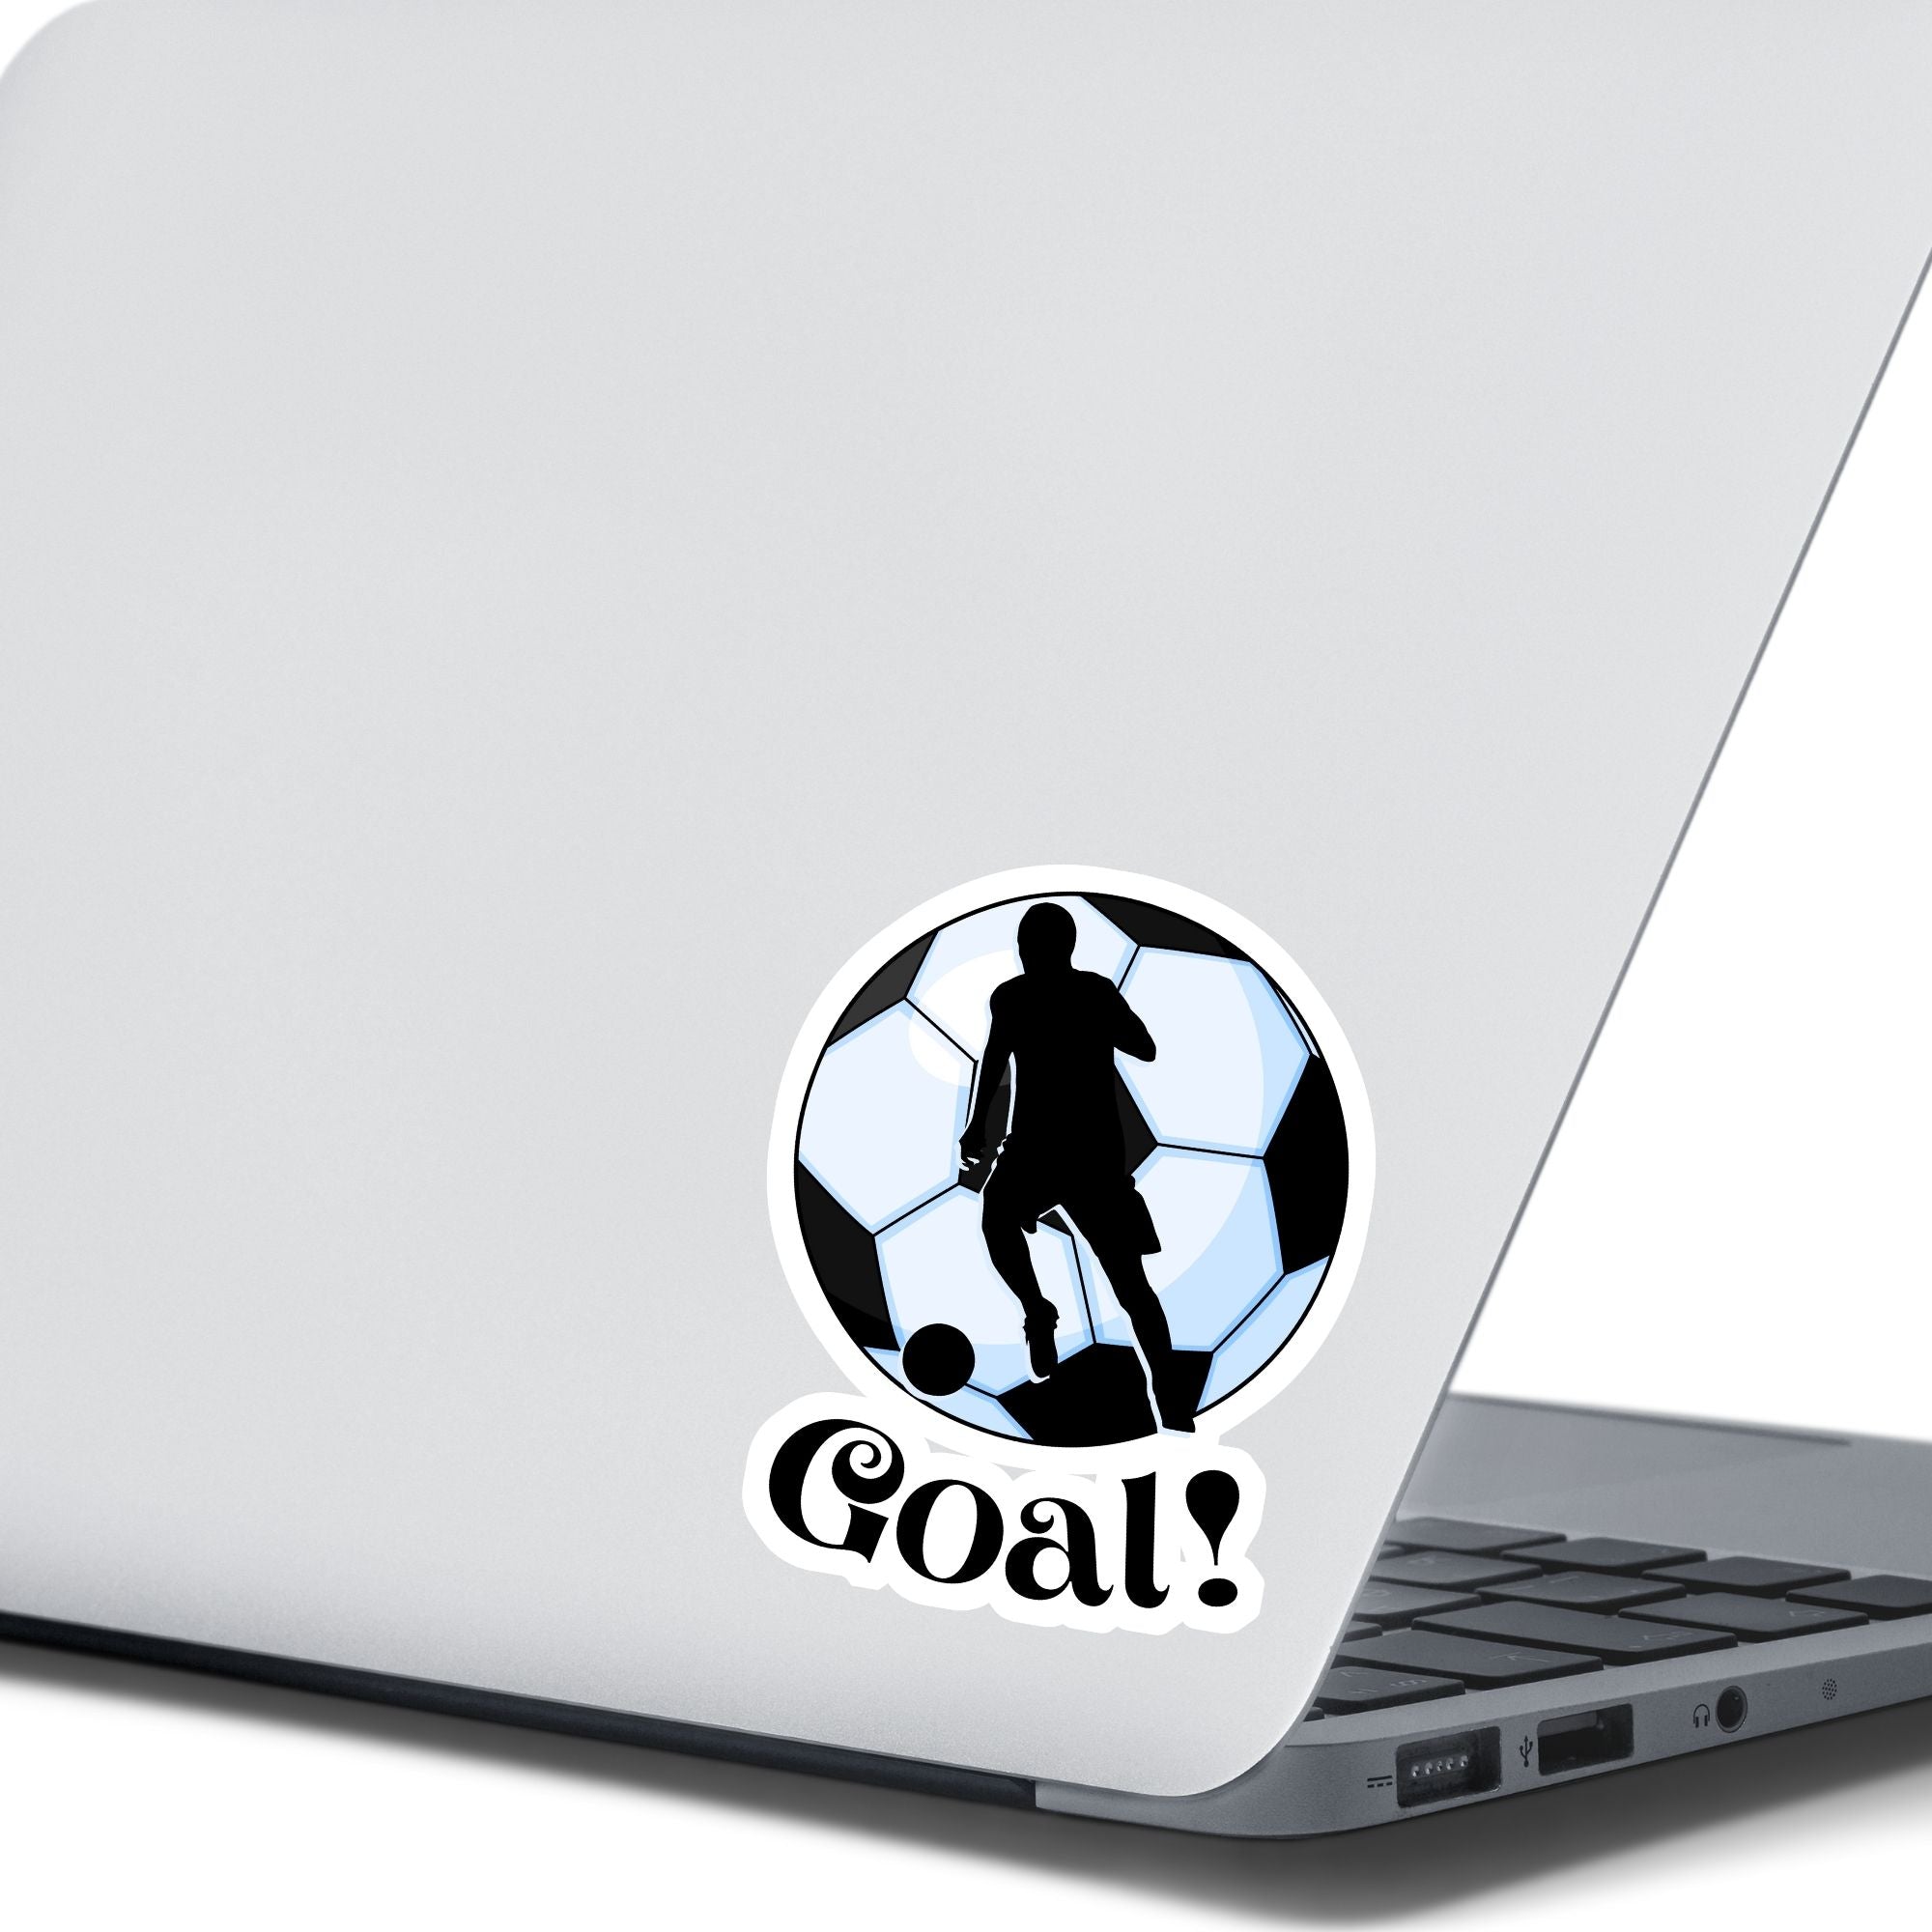 Show your love of soccer, or football, with this individual die-cut sticker! This sticker shows the silhouette of a player about to kick, on a black and white/blue soccer ball background, with the word "Goal!" below. This image shows the soccer sticker on the back of an open laptop.